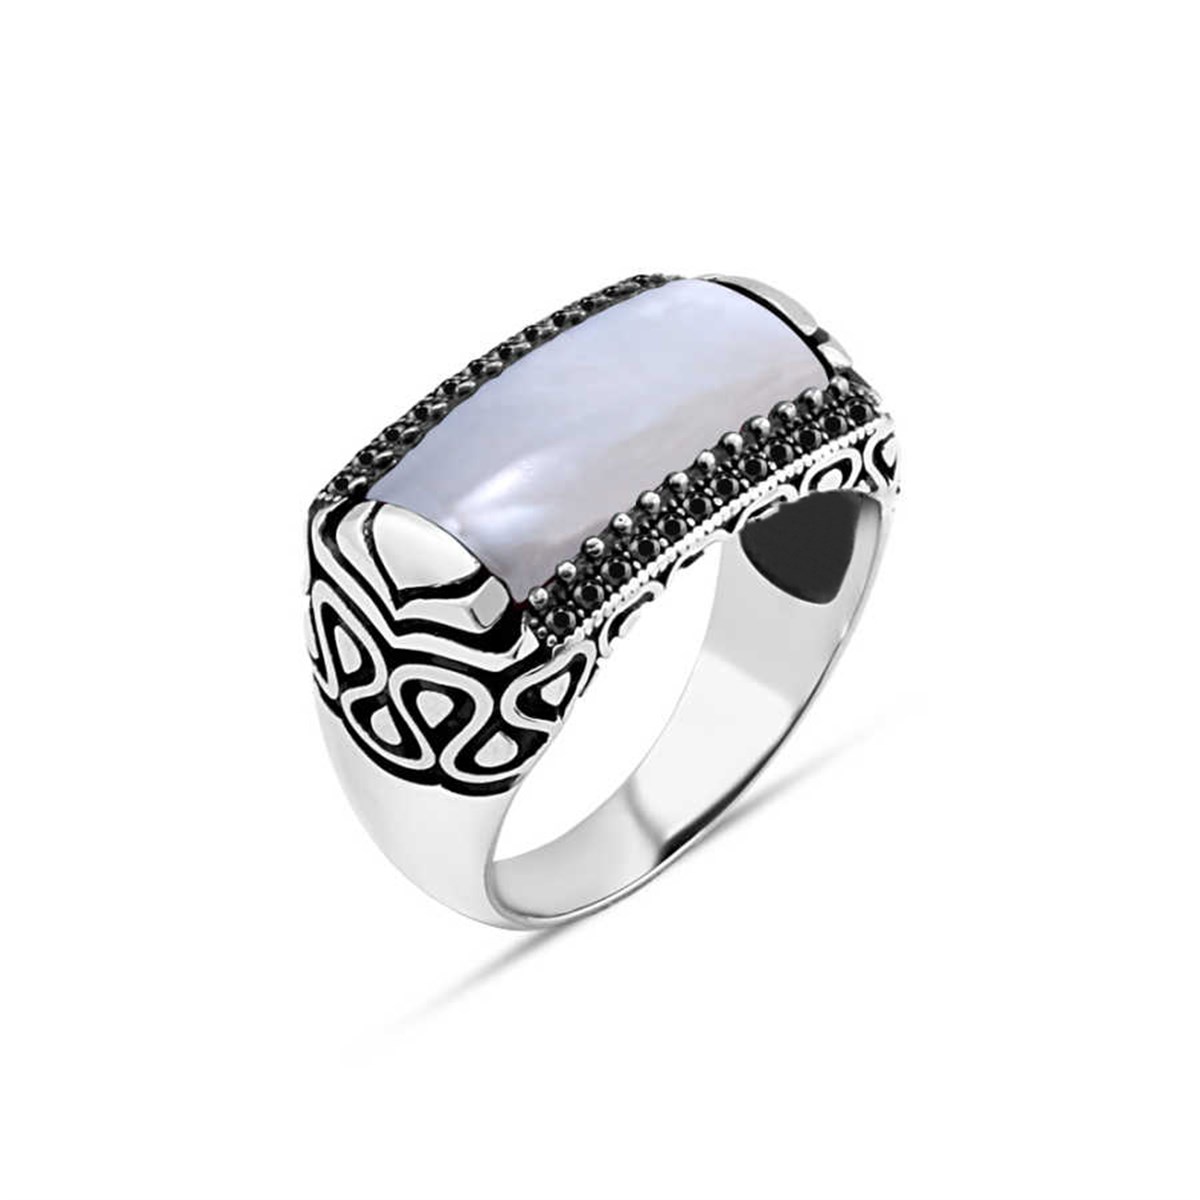 Small Black Zircon Stone Sterling Silver Men's Ring with Mother of Pearl Stone